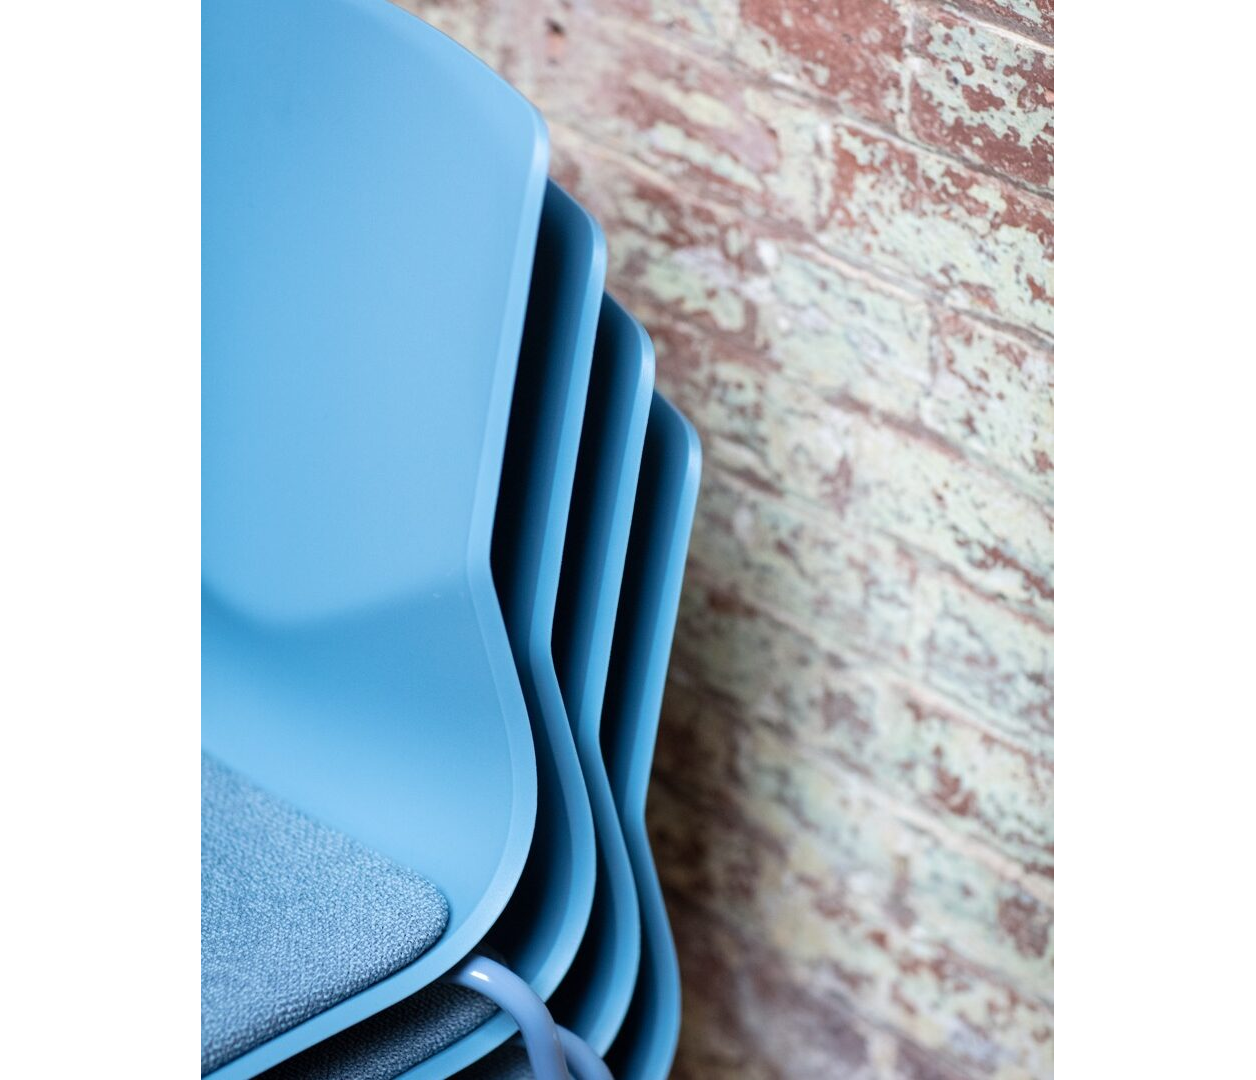 OCEE&FOUR – Chairs – FourSure 44 – Details Image 1 Large